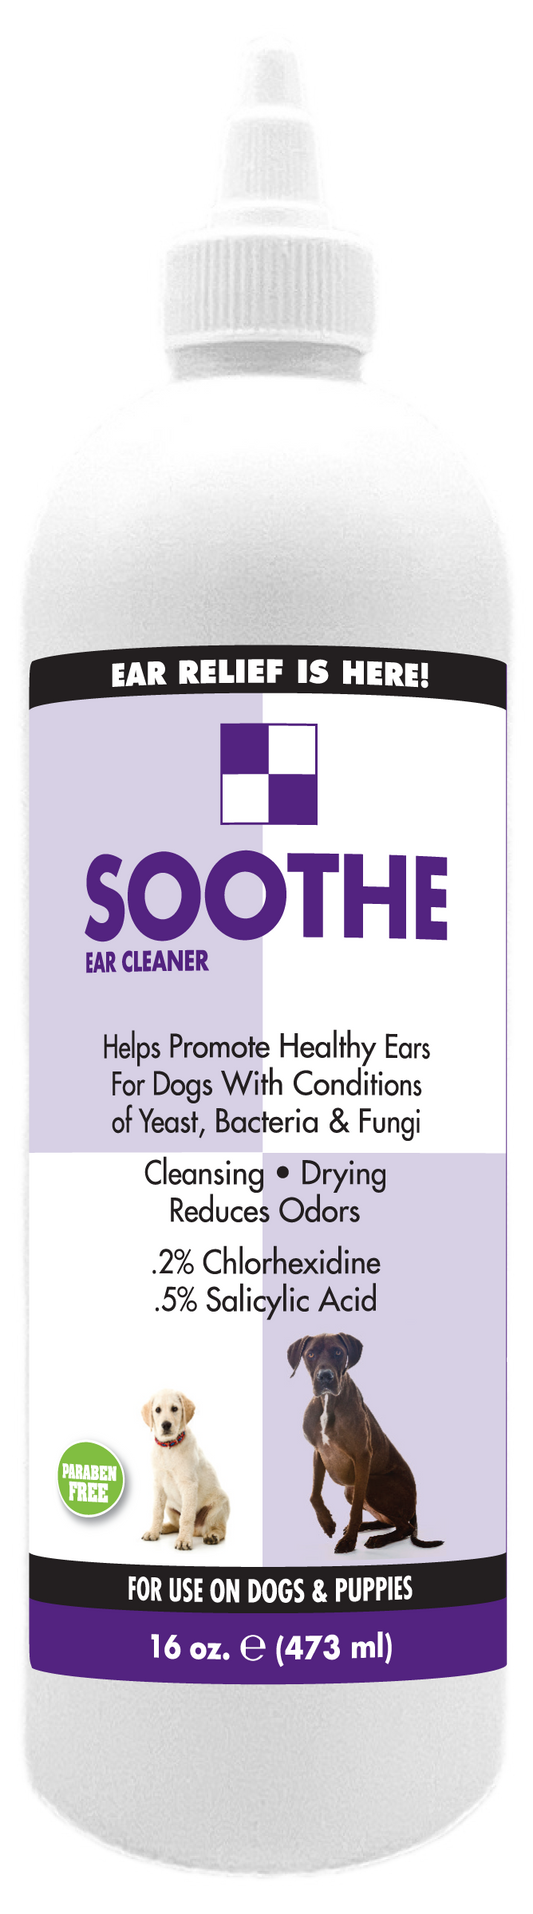 Soothe™ Ear Cleaner | Showseason®